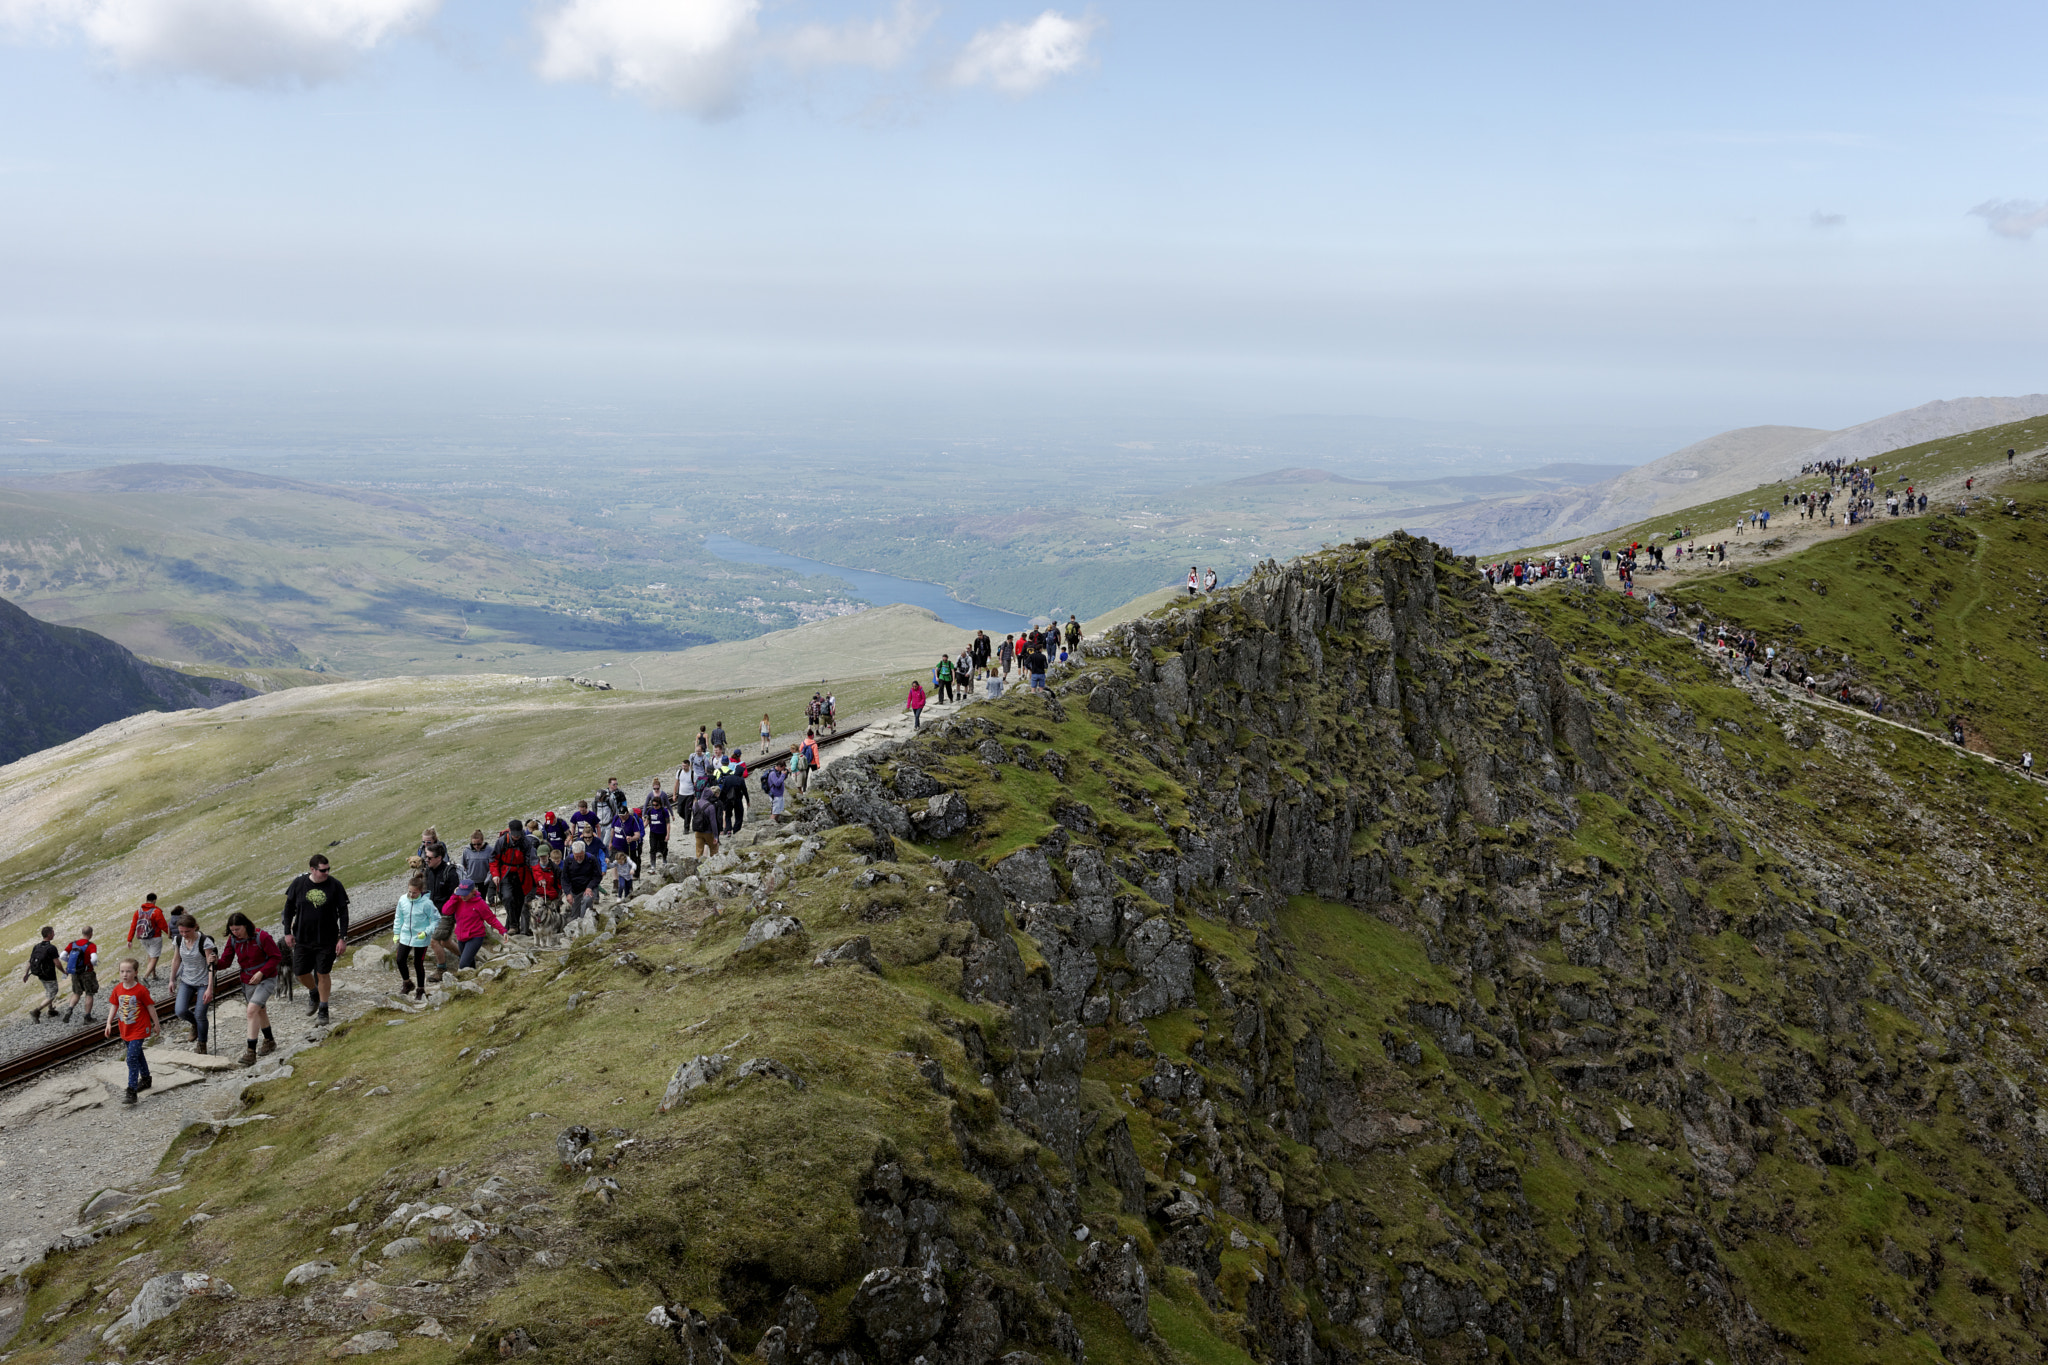 ZEISS Distagon T* 35mm F2 sample photo. Walkers on mountain path, mount snowdon. photography